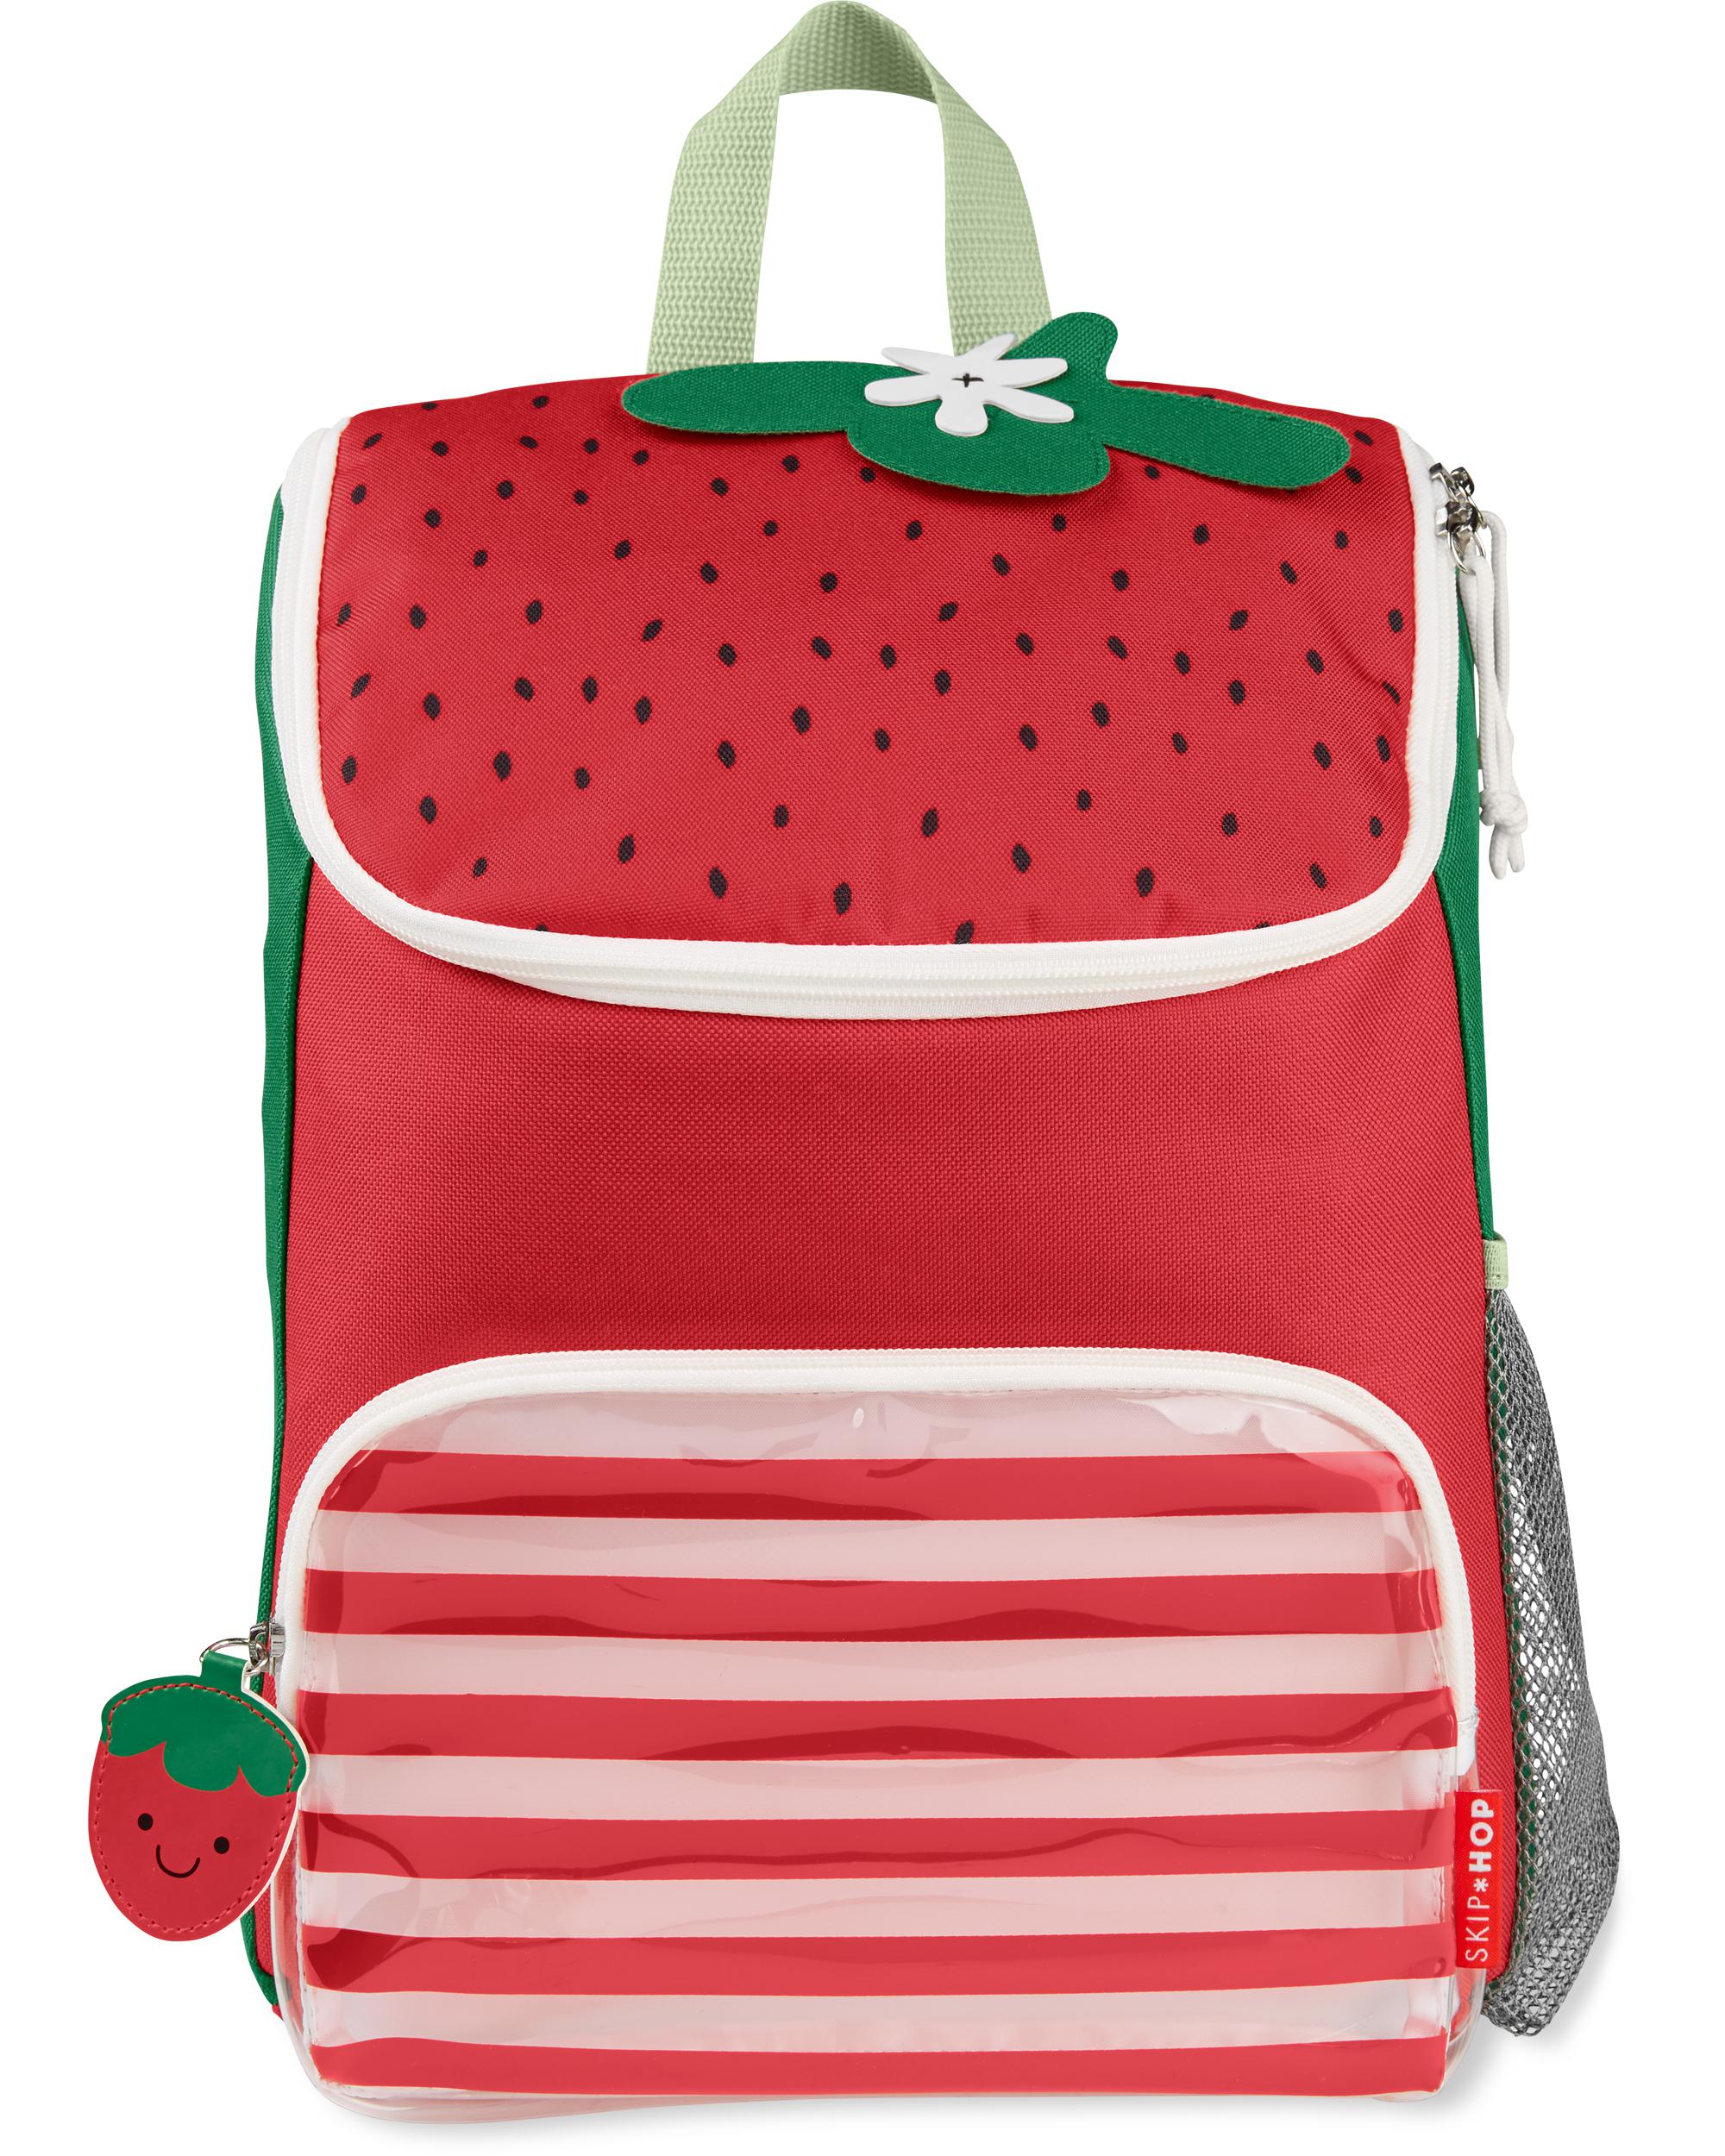 Spark Style Big Kid Backpack - Strawberry